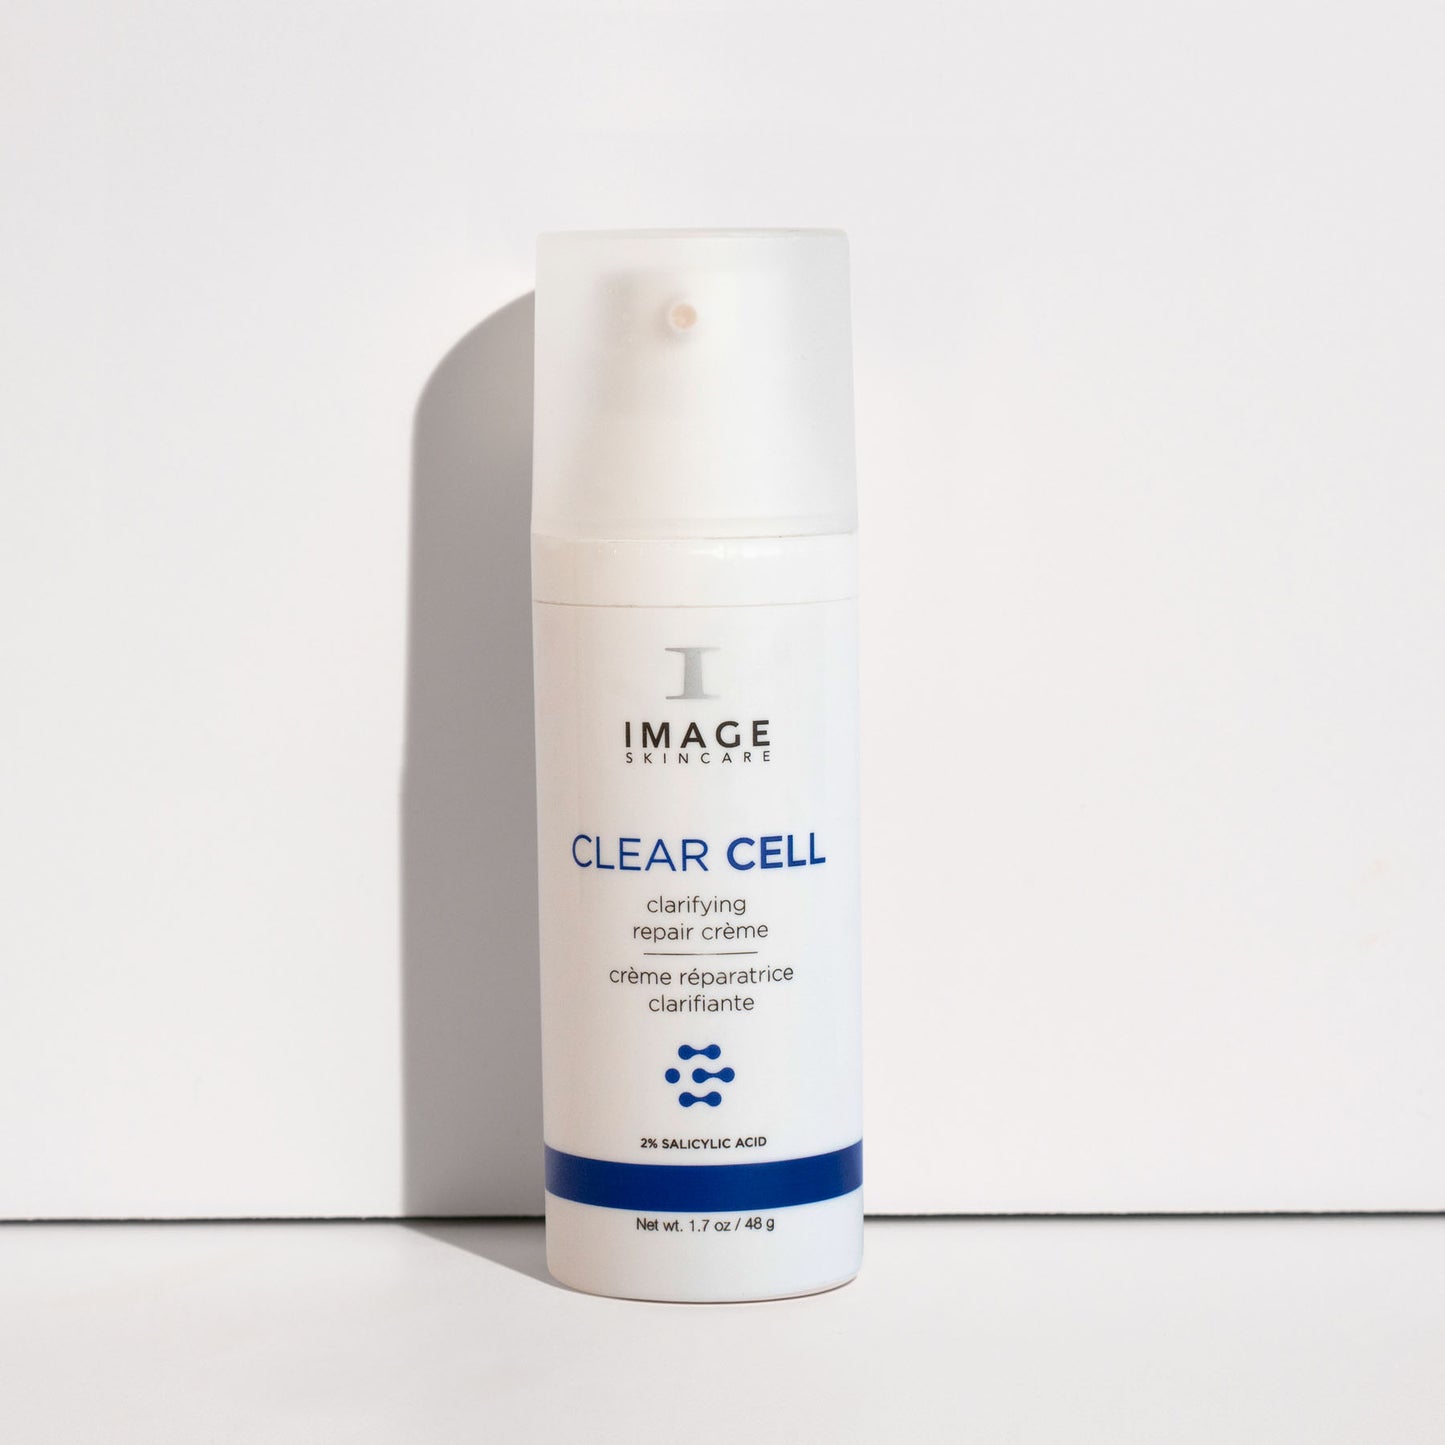 CLEAR CELL CLARIFYING REPAIR CREME